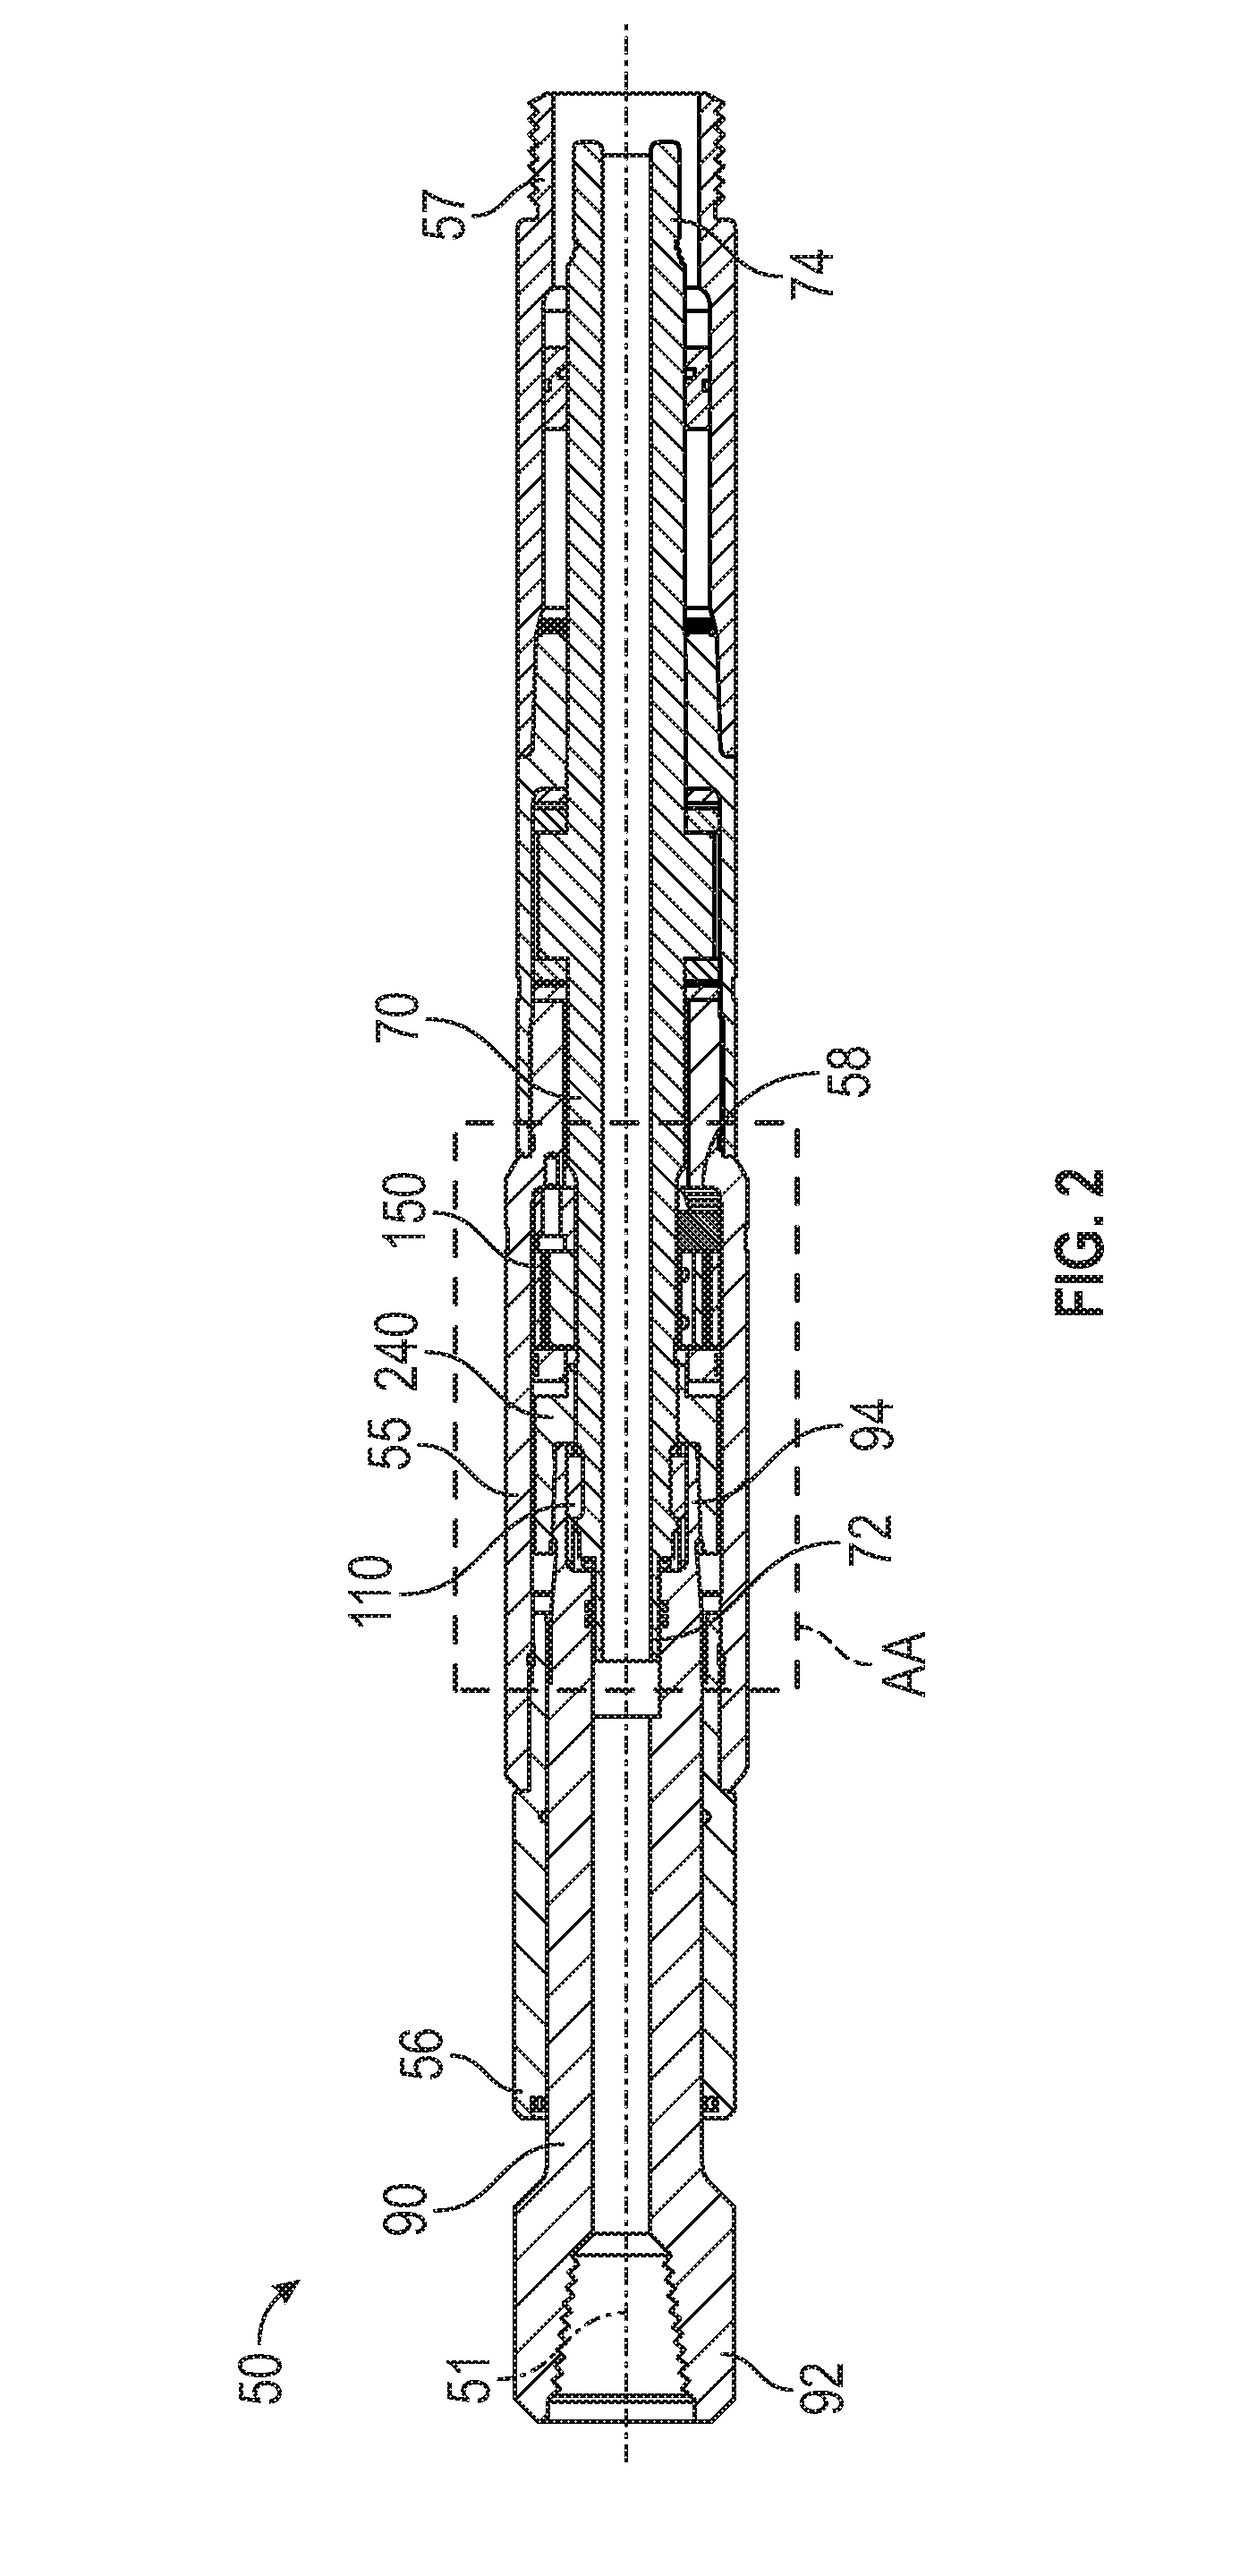 Apparatus and methods for activating a downhole percussion tool